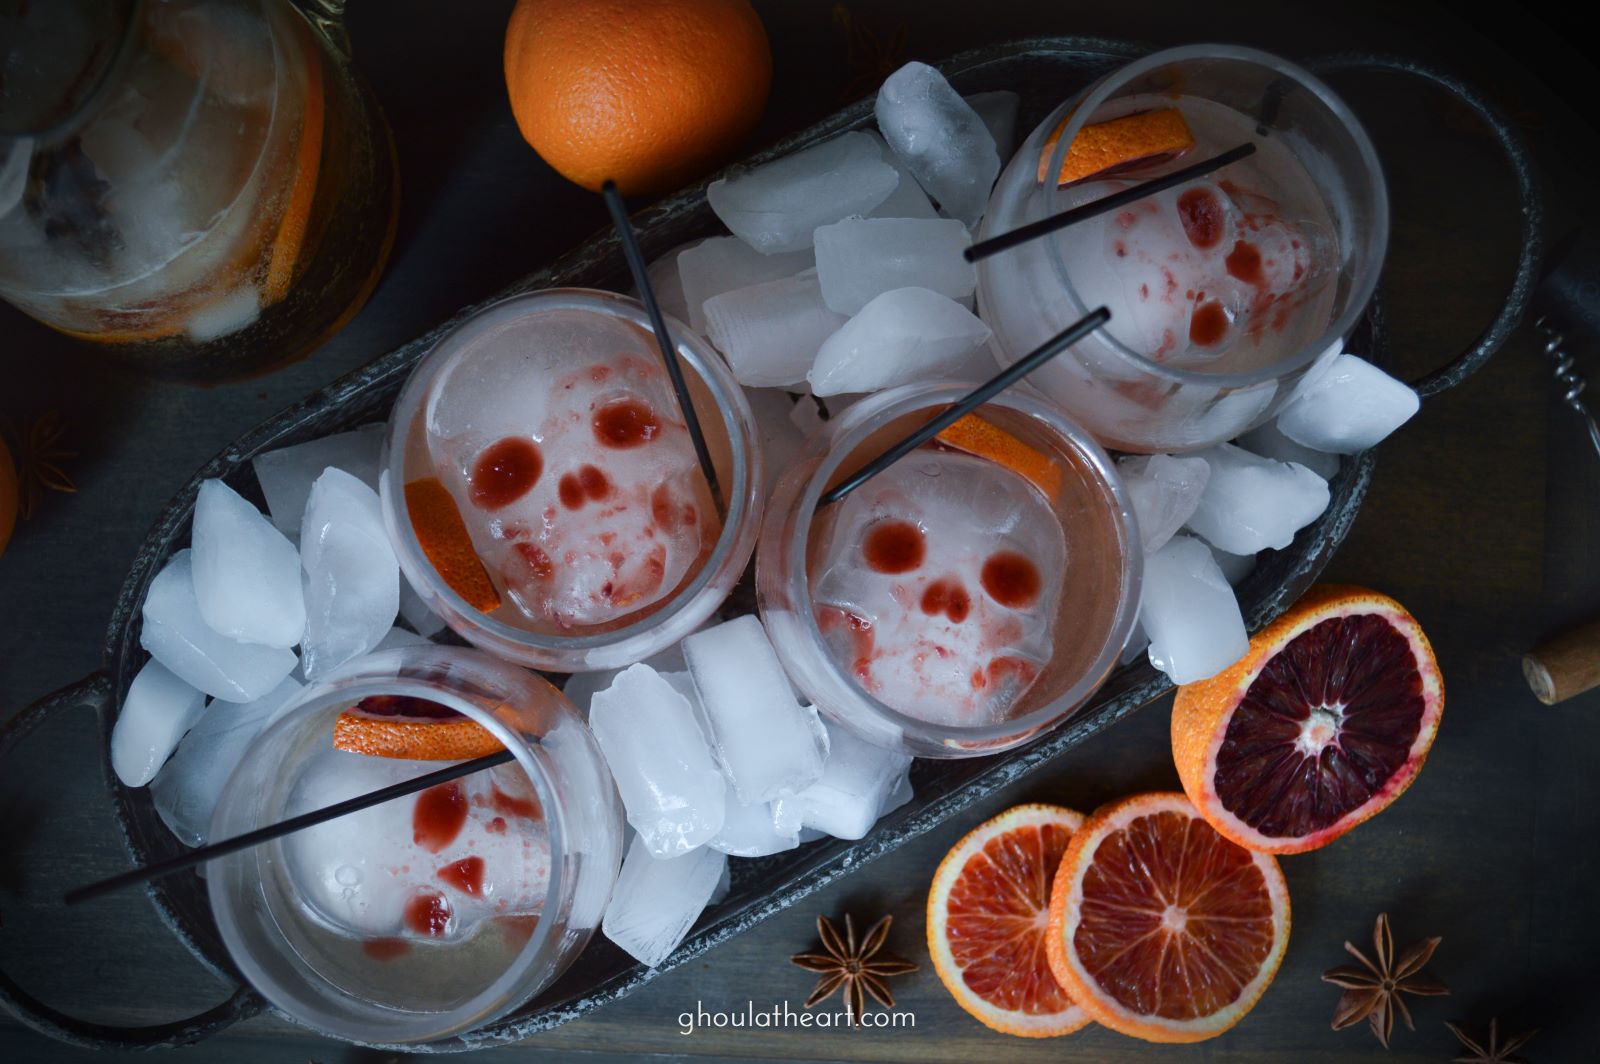 https://ghoulatheart.com/wp-content/uploads/2023/02/Polter-iced-Cocktails1-.jpg